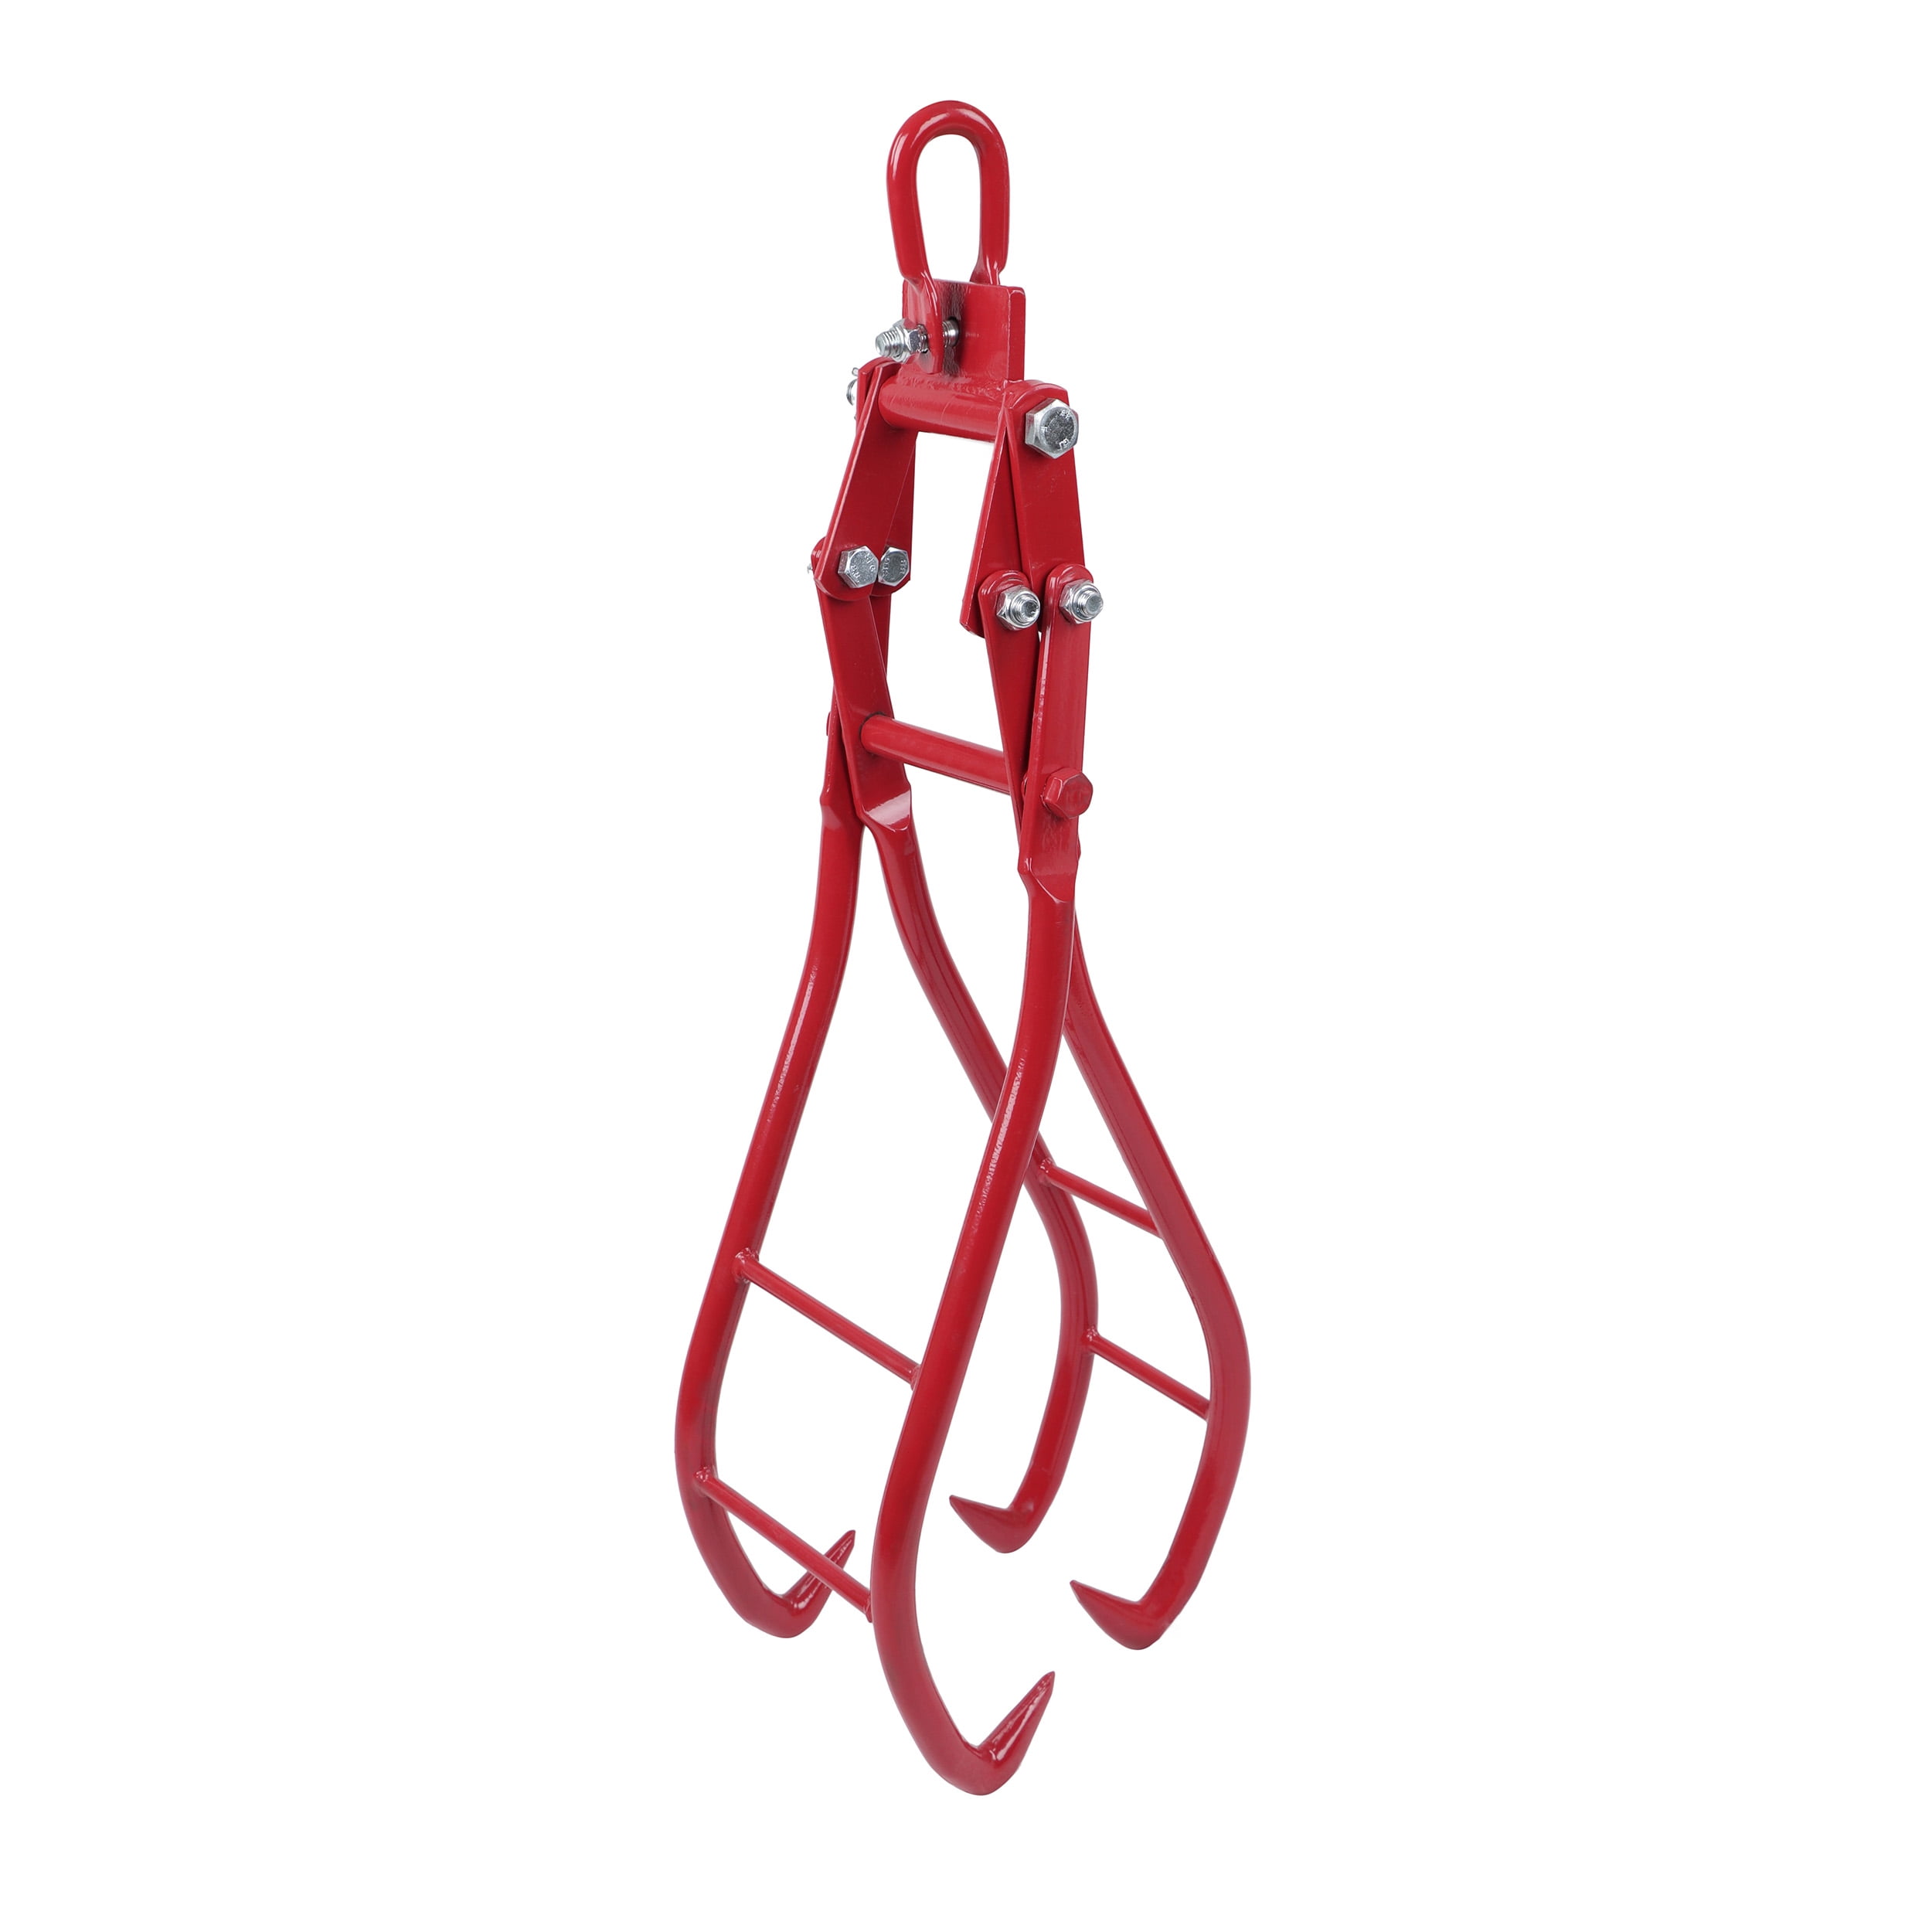 Tidoin 16 in. Red Carbon Steel Log Tongs Heavy-Duty Grapple Timber